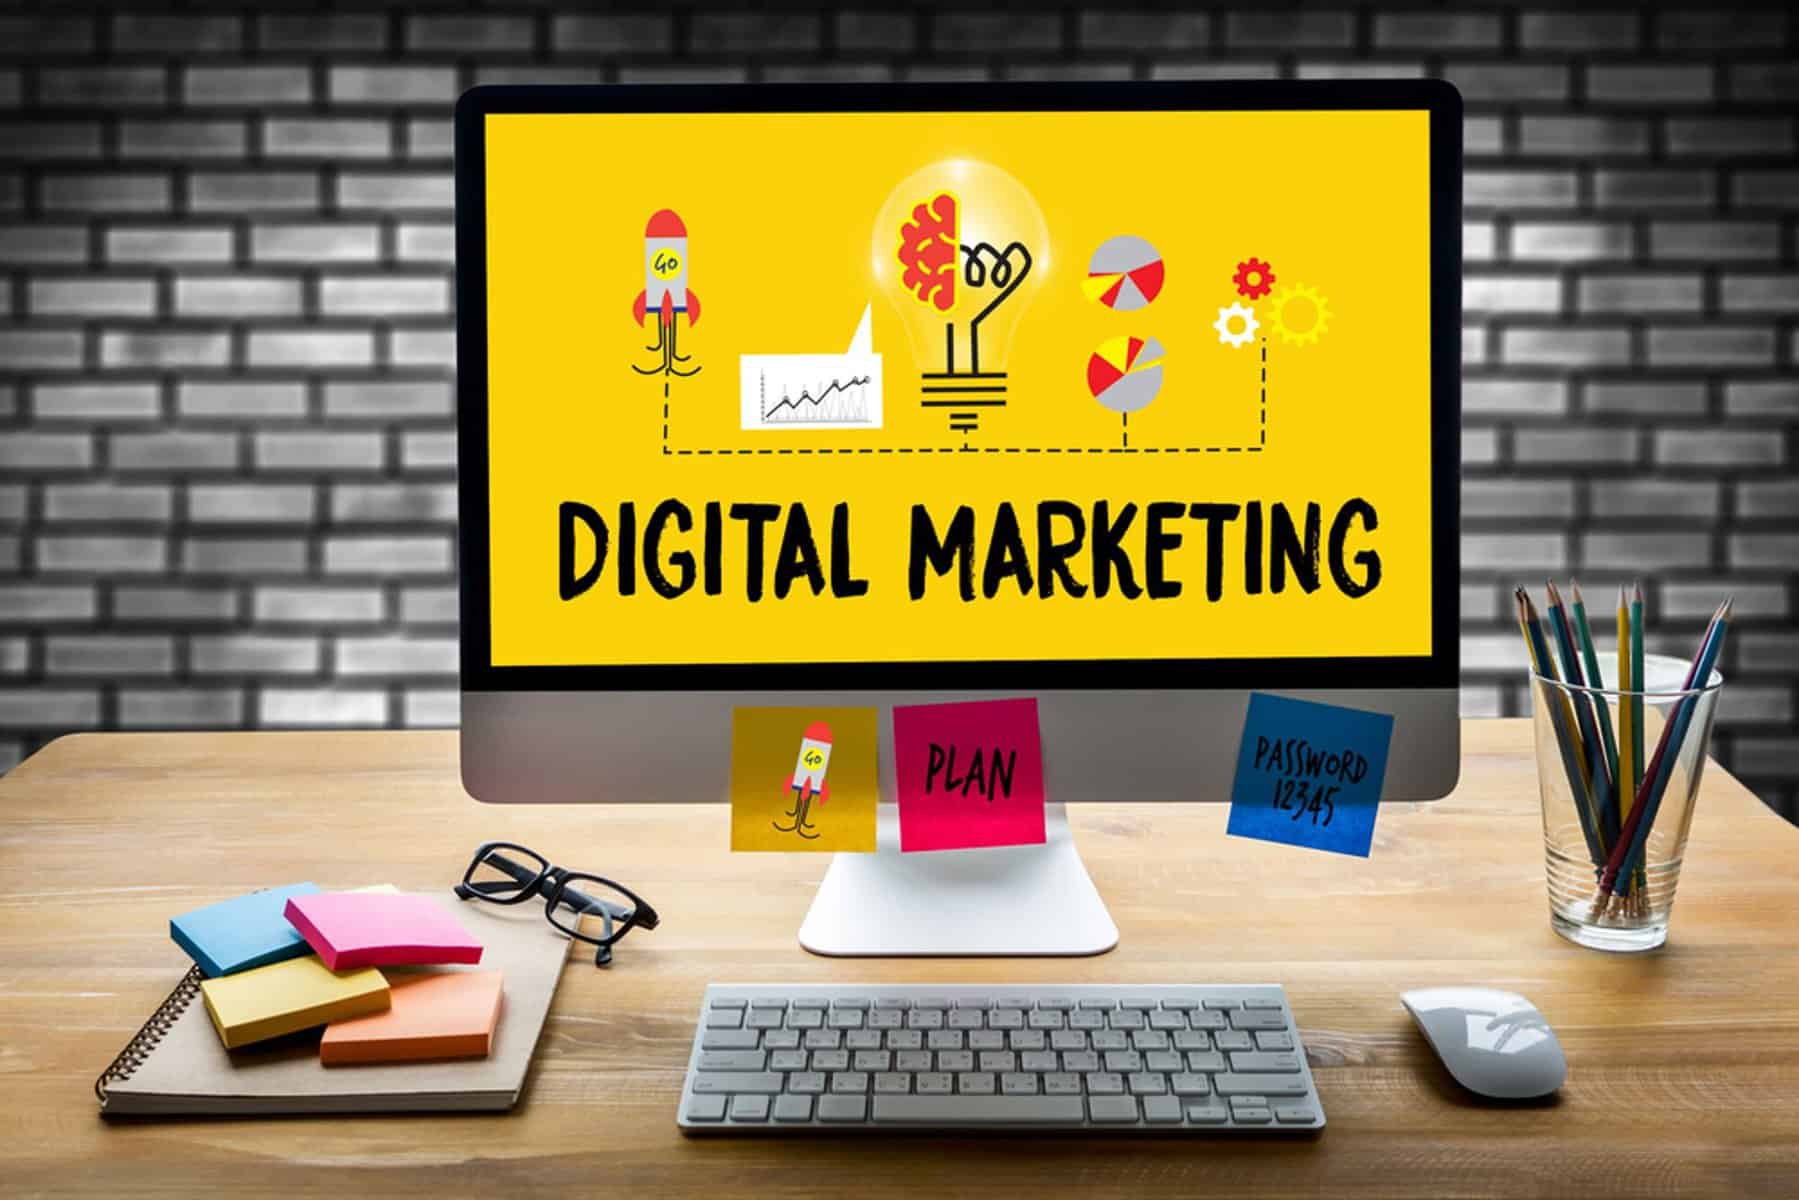 Photo of desk with a screen that has the words "DIGITAL MARKETING" below an infographic illustration.